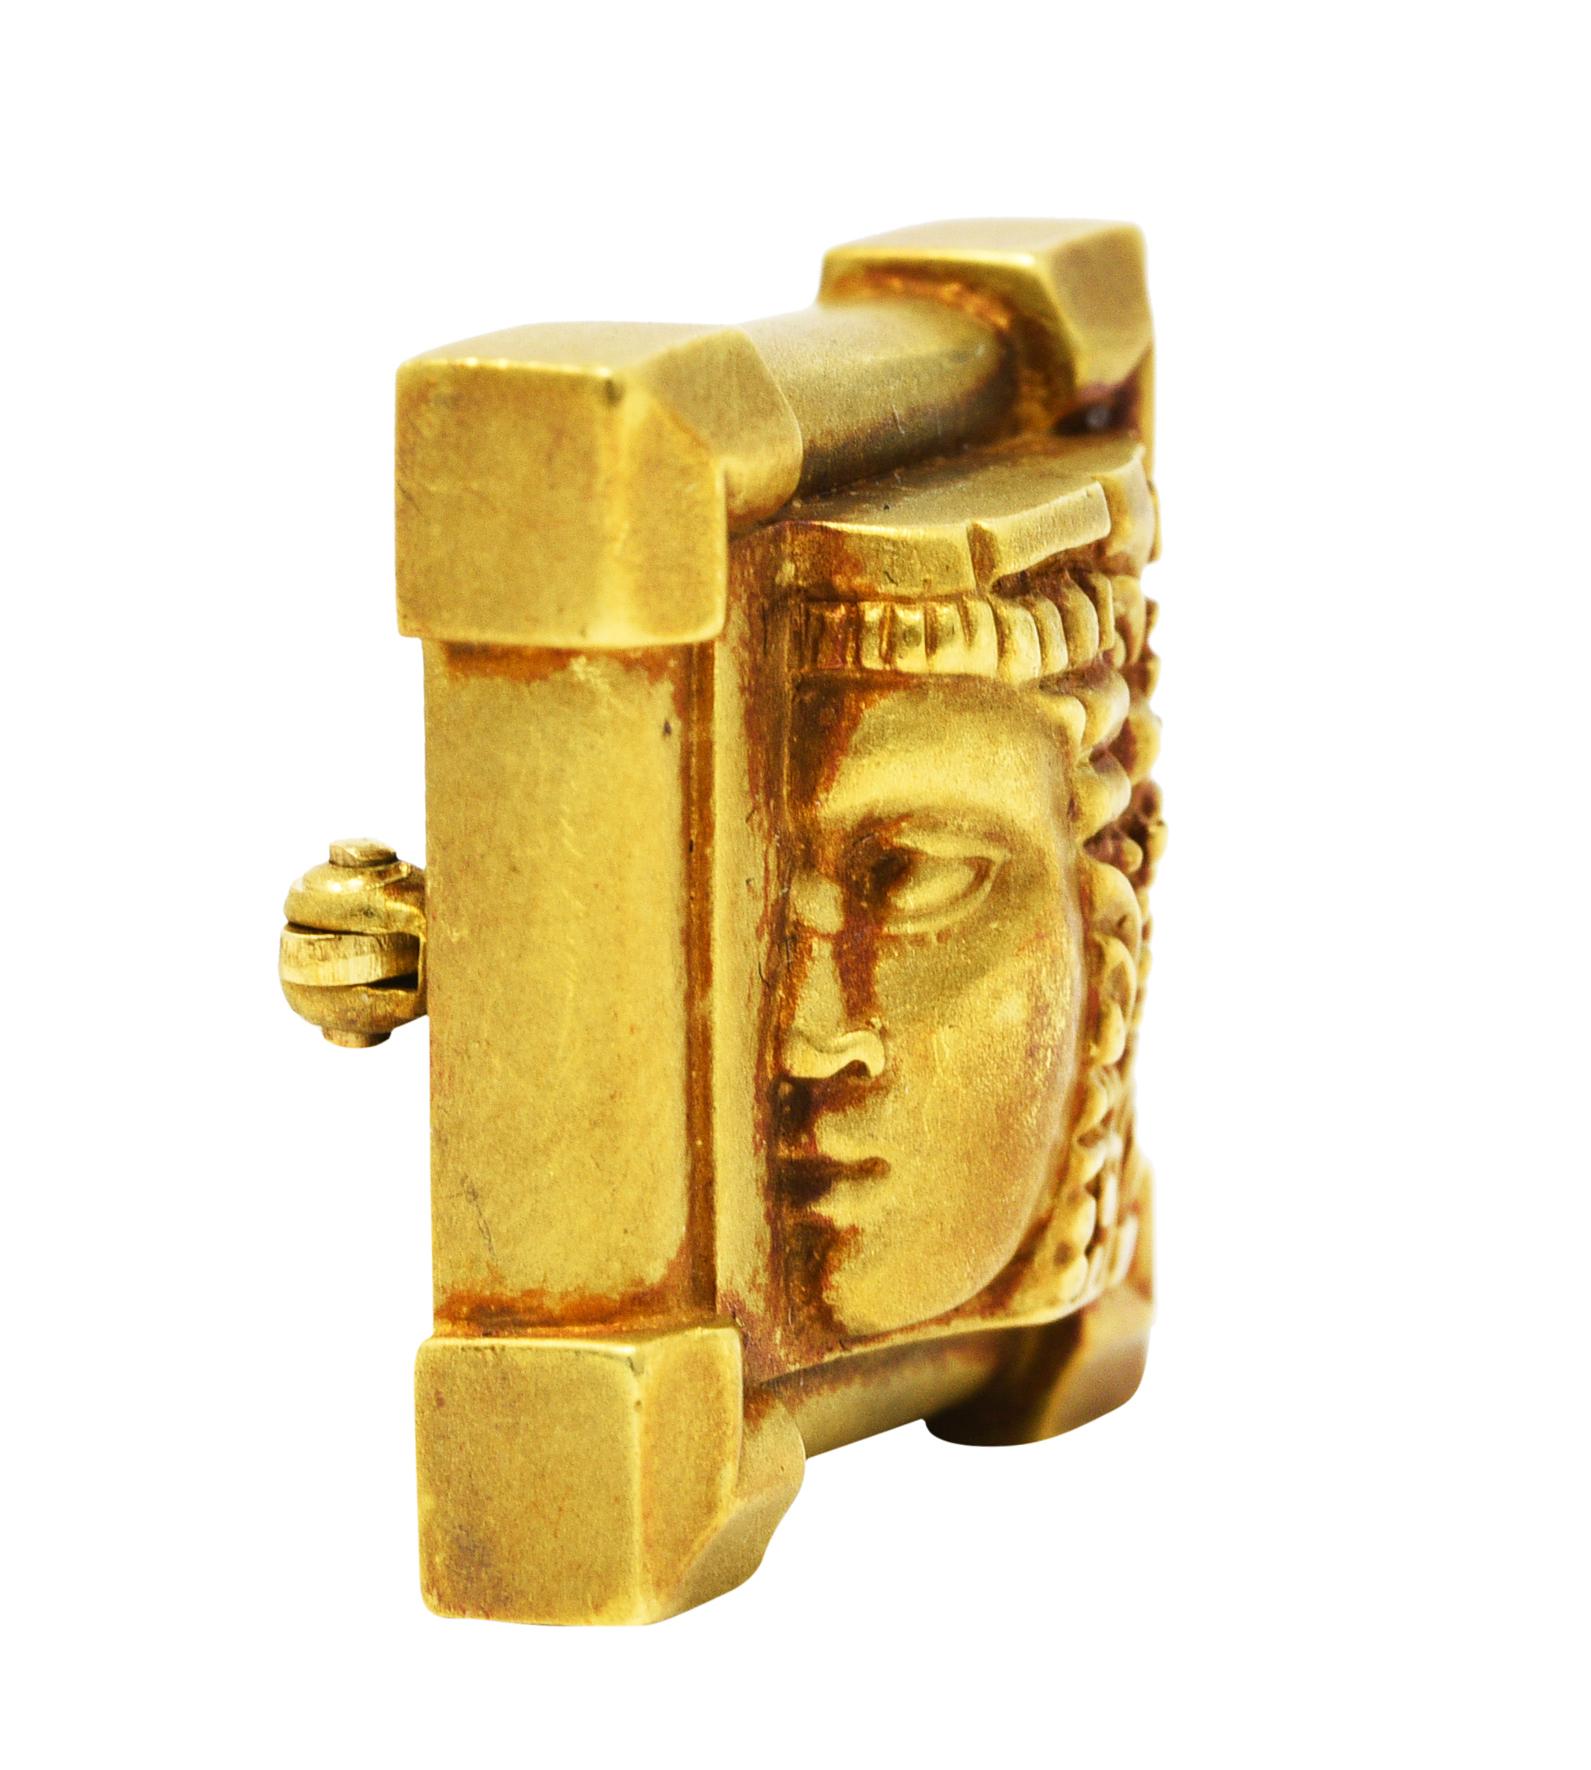 Square shaped brooch depicts a highly rendered female profile that protrudes forward

Headdress is deeply engraved with geometric motifs

With a structured border emphasized at each corner

Completed by a matte finish and a pin stem with locking